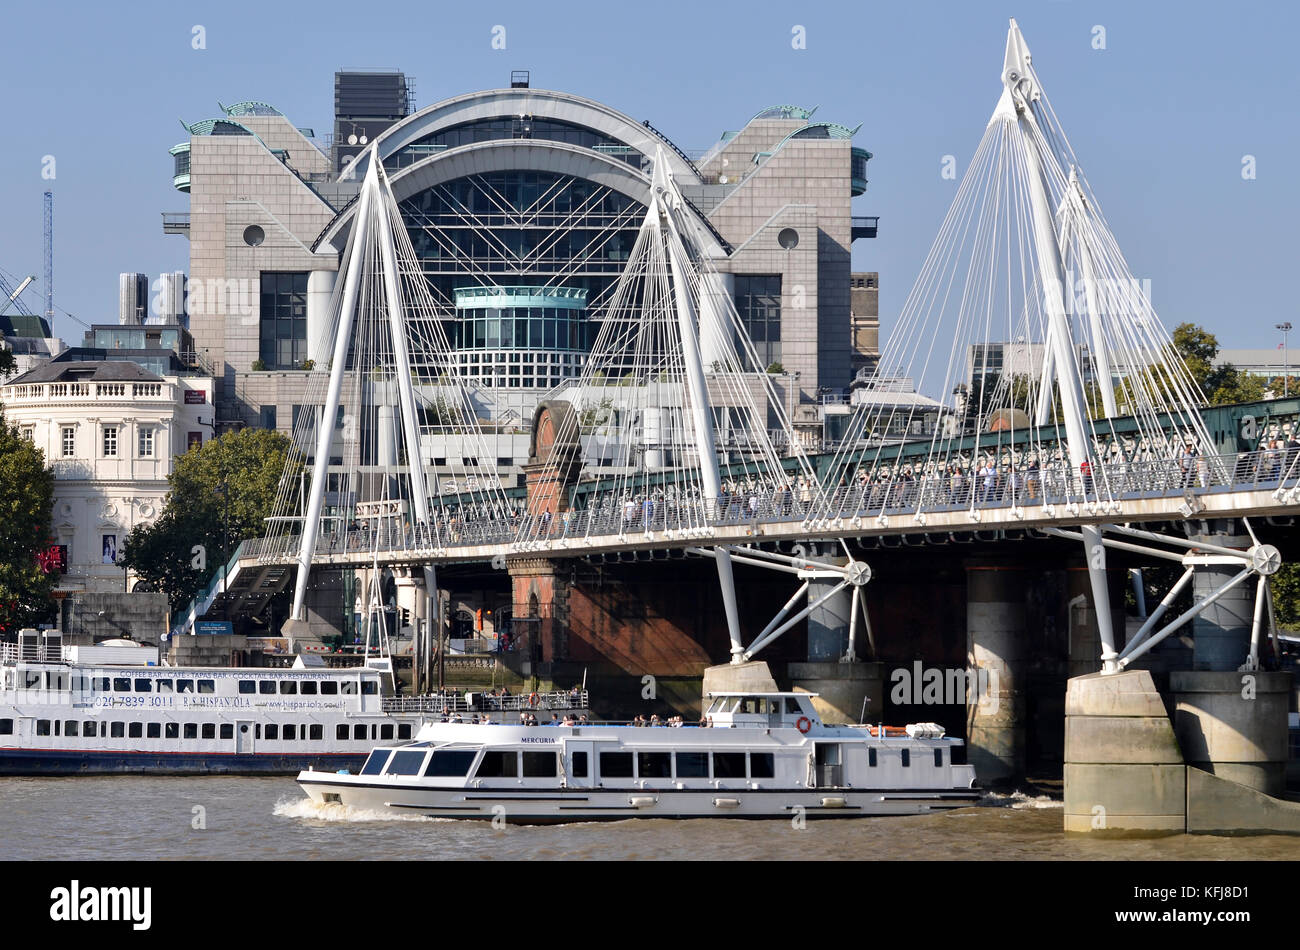 Golden Jubilee and Hungerford Bridges, River Thames, London, UK. Mercuria pleasure boat in foreground and Charing Cross Station behind. Stock Photo